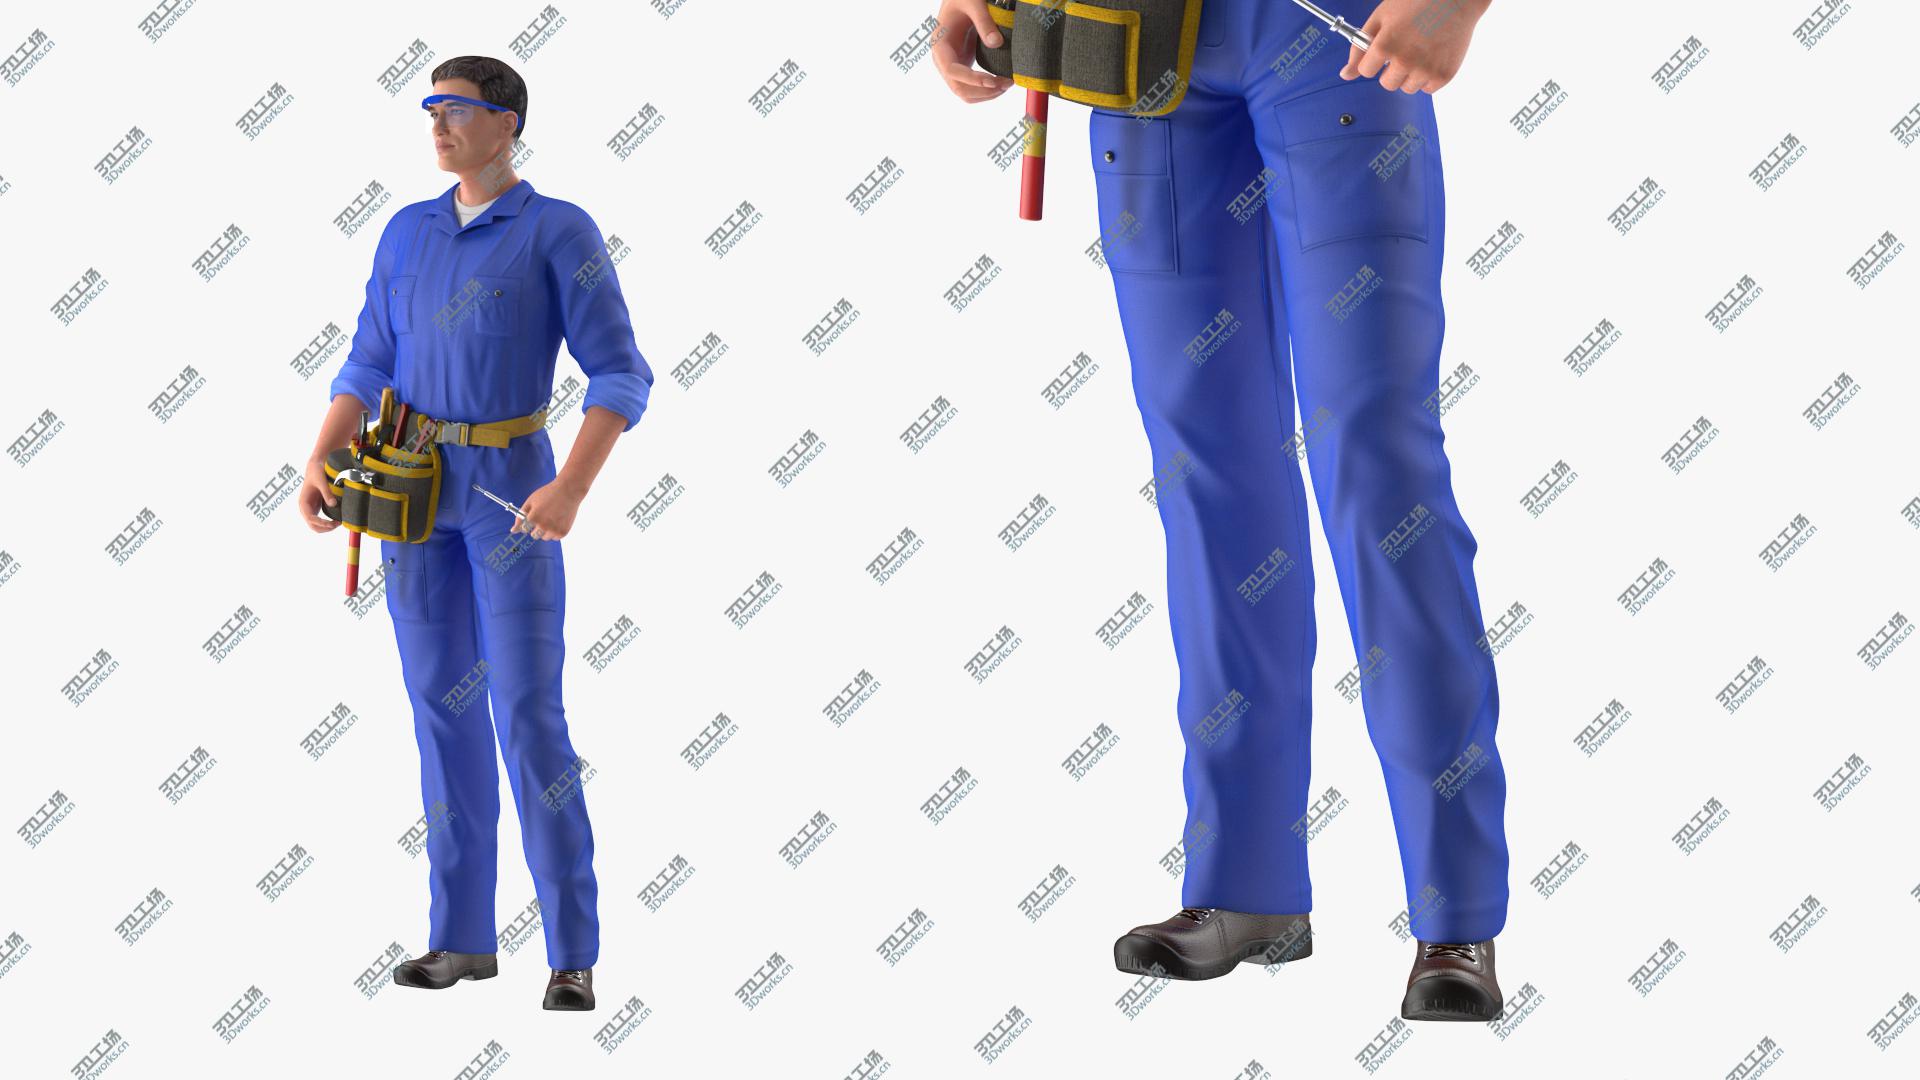 images/goods_img/202104093/3D Electrician Standing Pose model/2.jpg